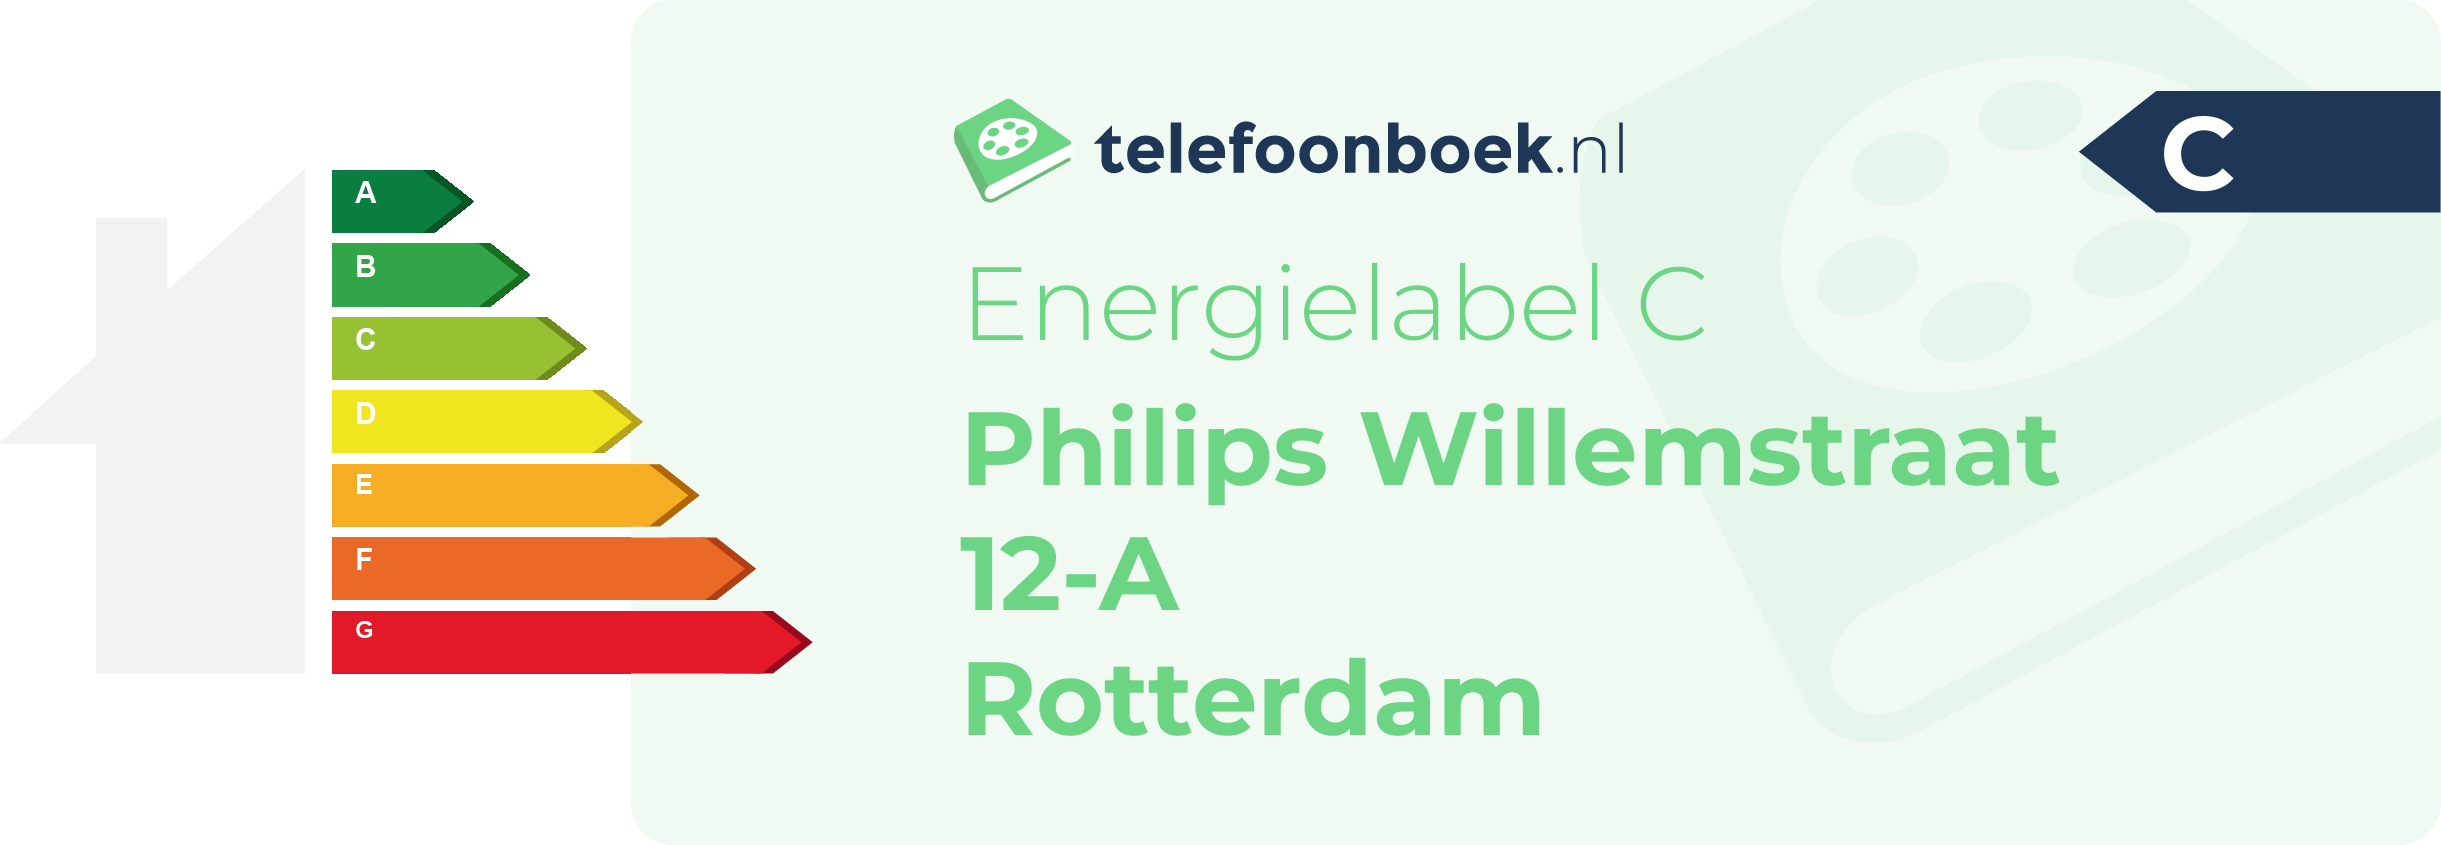 Energielabel Philips Willemstraat 12-A Rotterdam